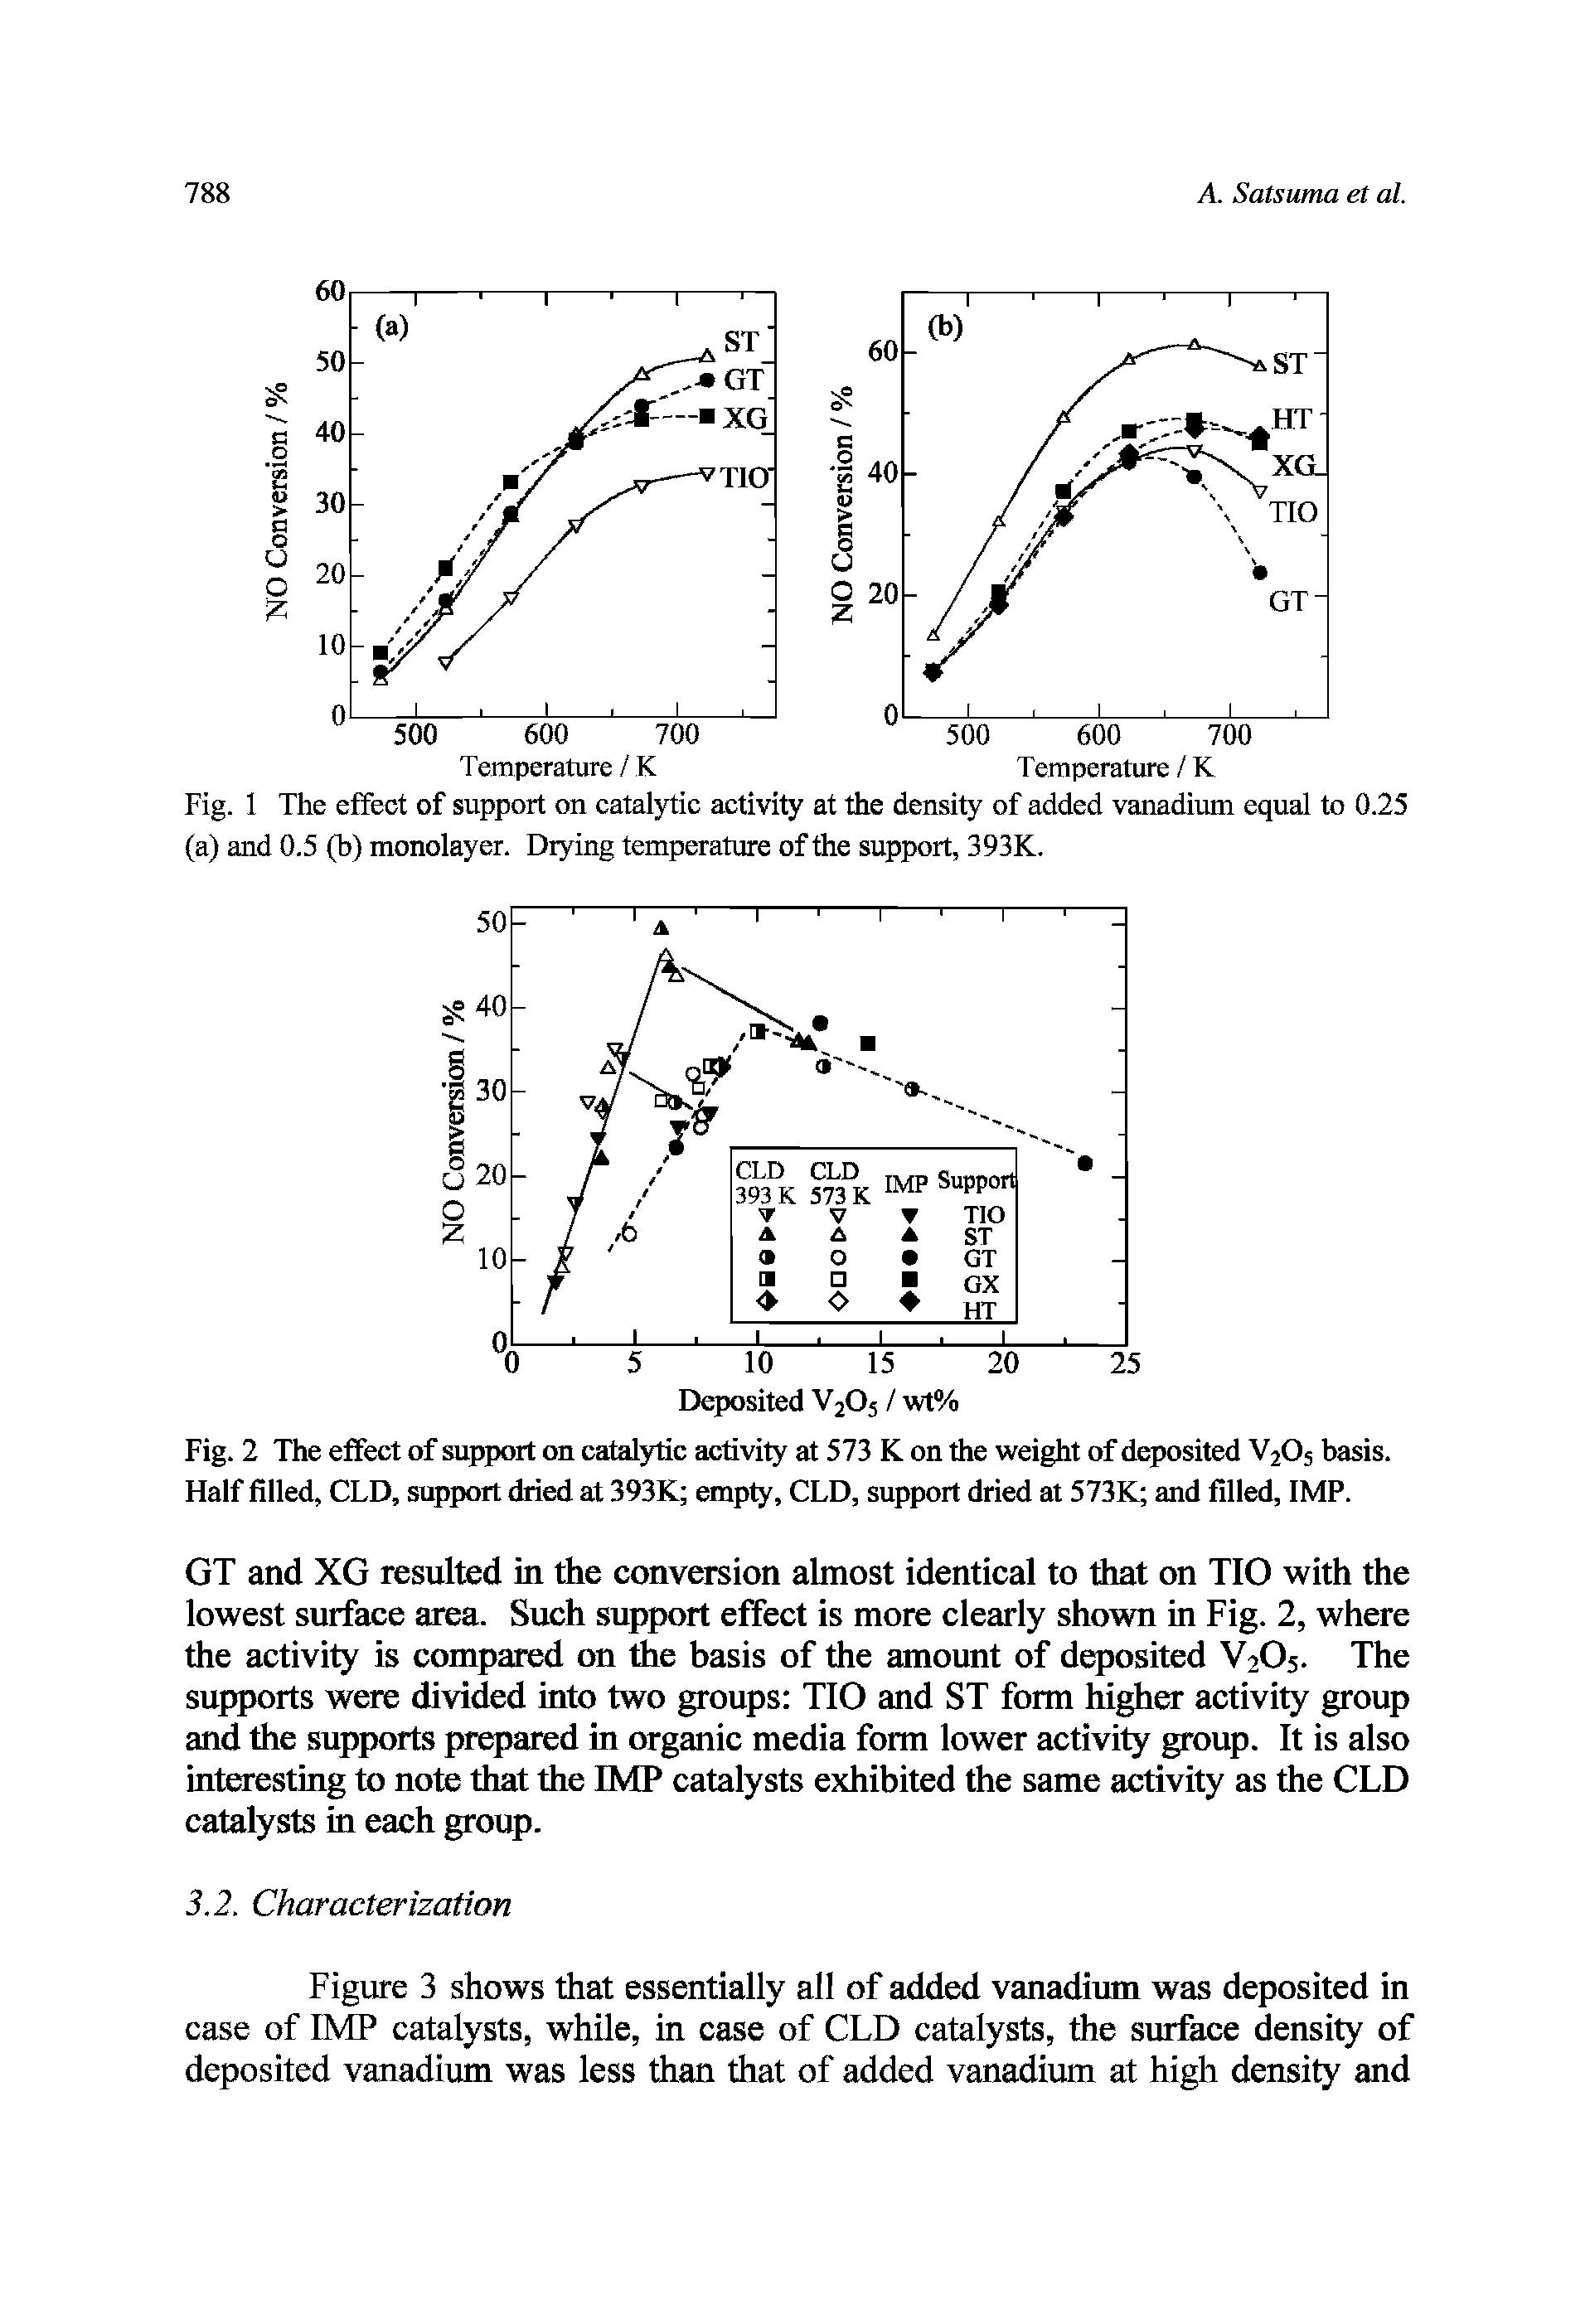 Fig. 1 The effect of support on catalytic activity at the density of added vanadium equal to 0.25 (a) and 0.5 (b) monolayer. Drying temperature of the support, 393K.